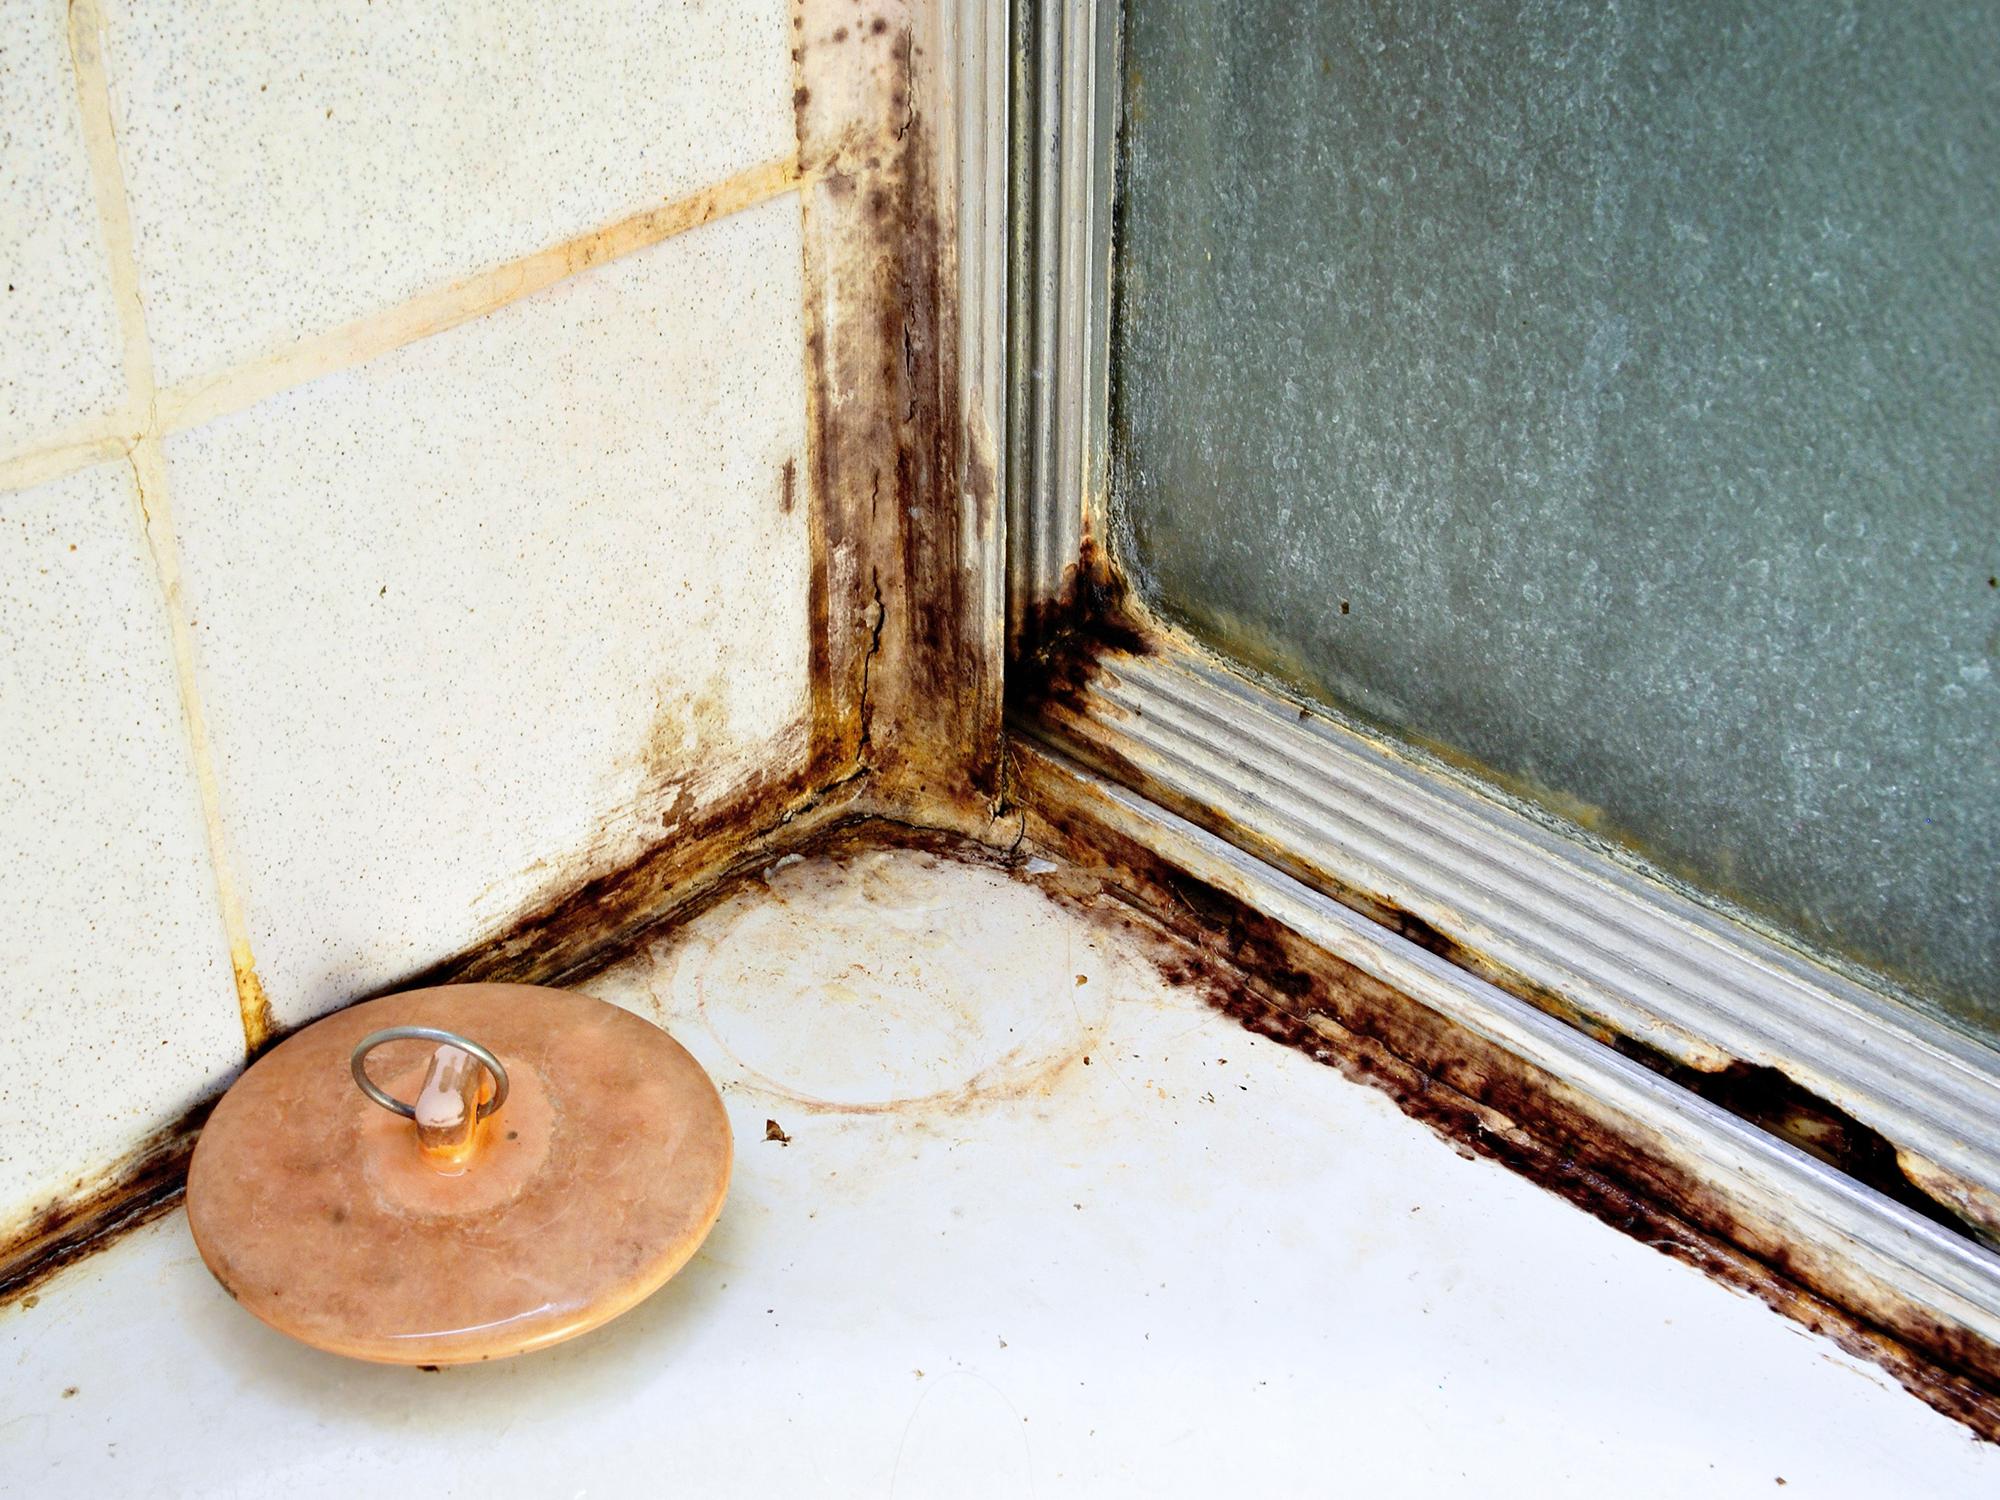 Mildew and mold growth can take place in damp areas of the home, including showers, sinks, bathrooms and kitchens. Clean damp areas, such as kitchens, bathtubs or under-sink cabinets, frequently to reduce mold-feeding spores and microbes. (Photo by Canstock)